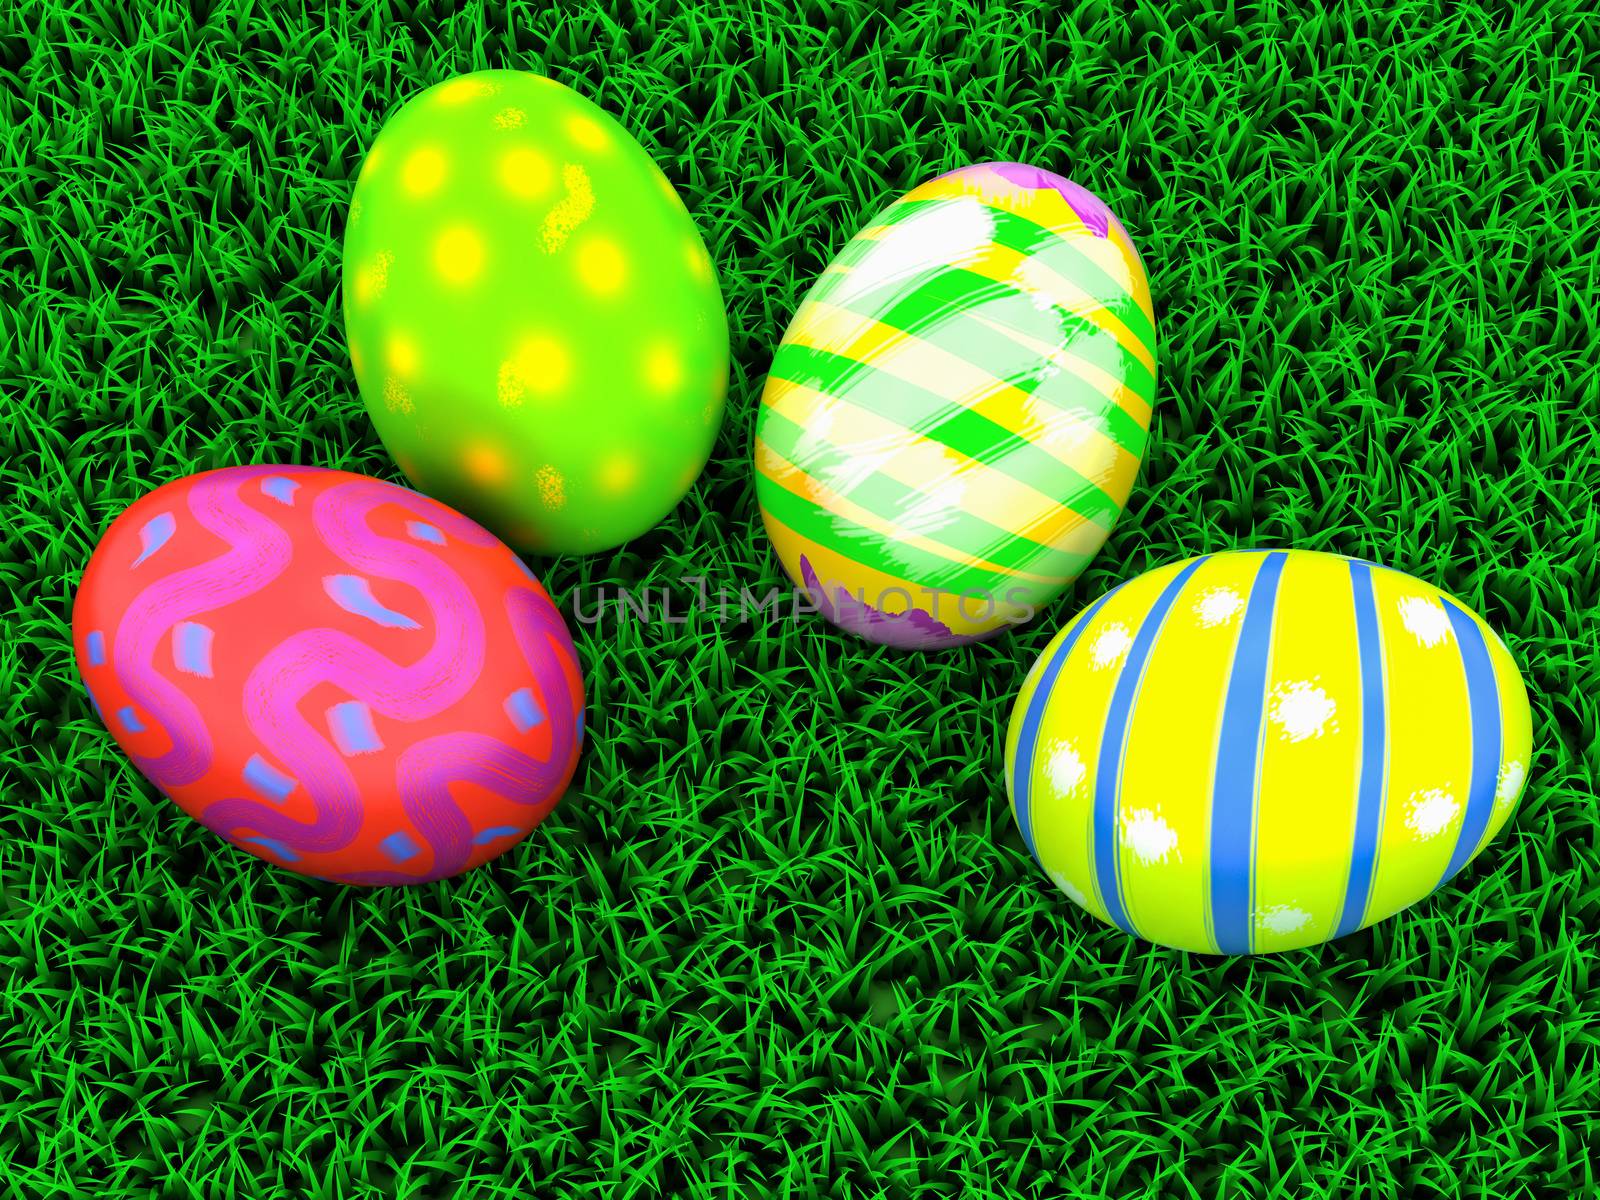 colorful Easter eggs on a grass background